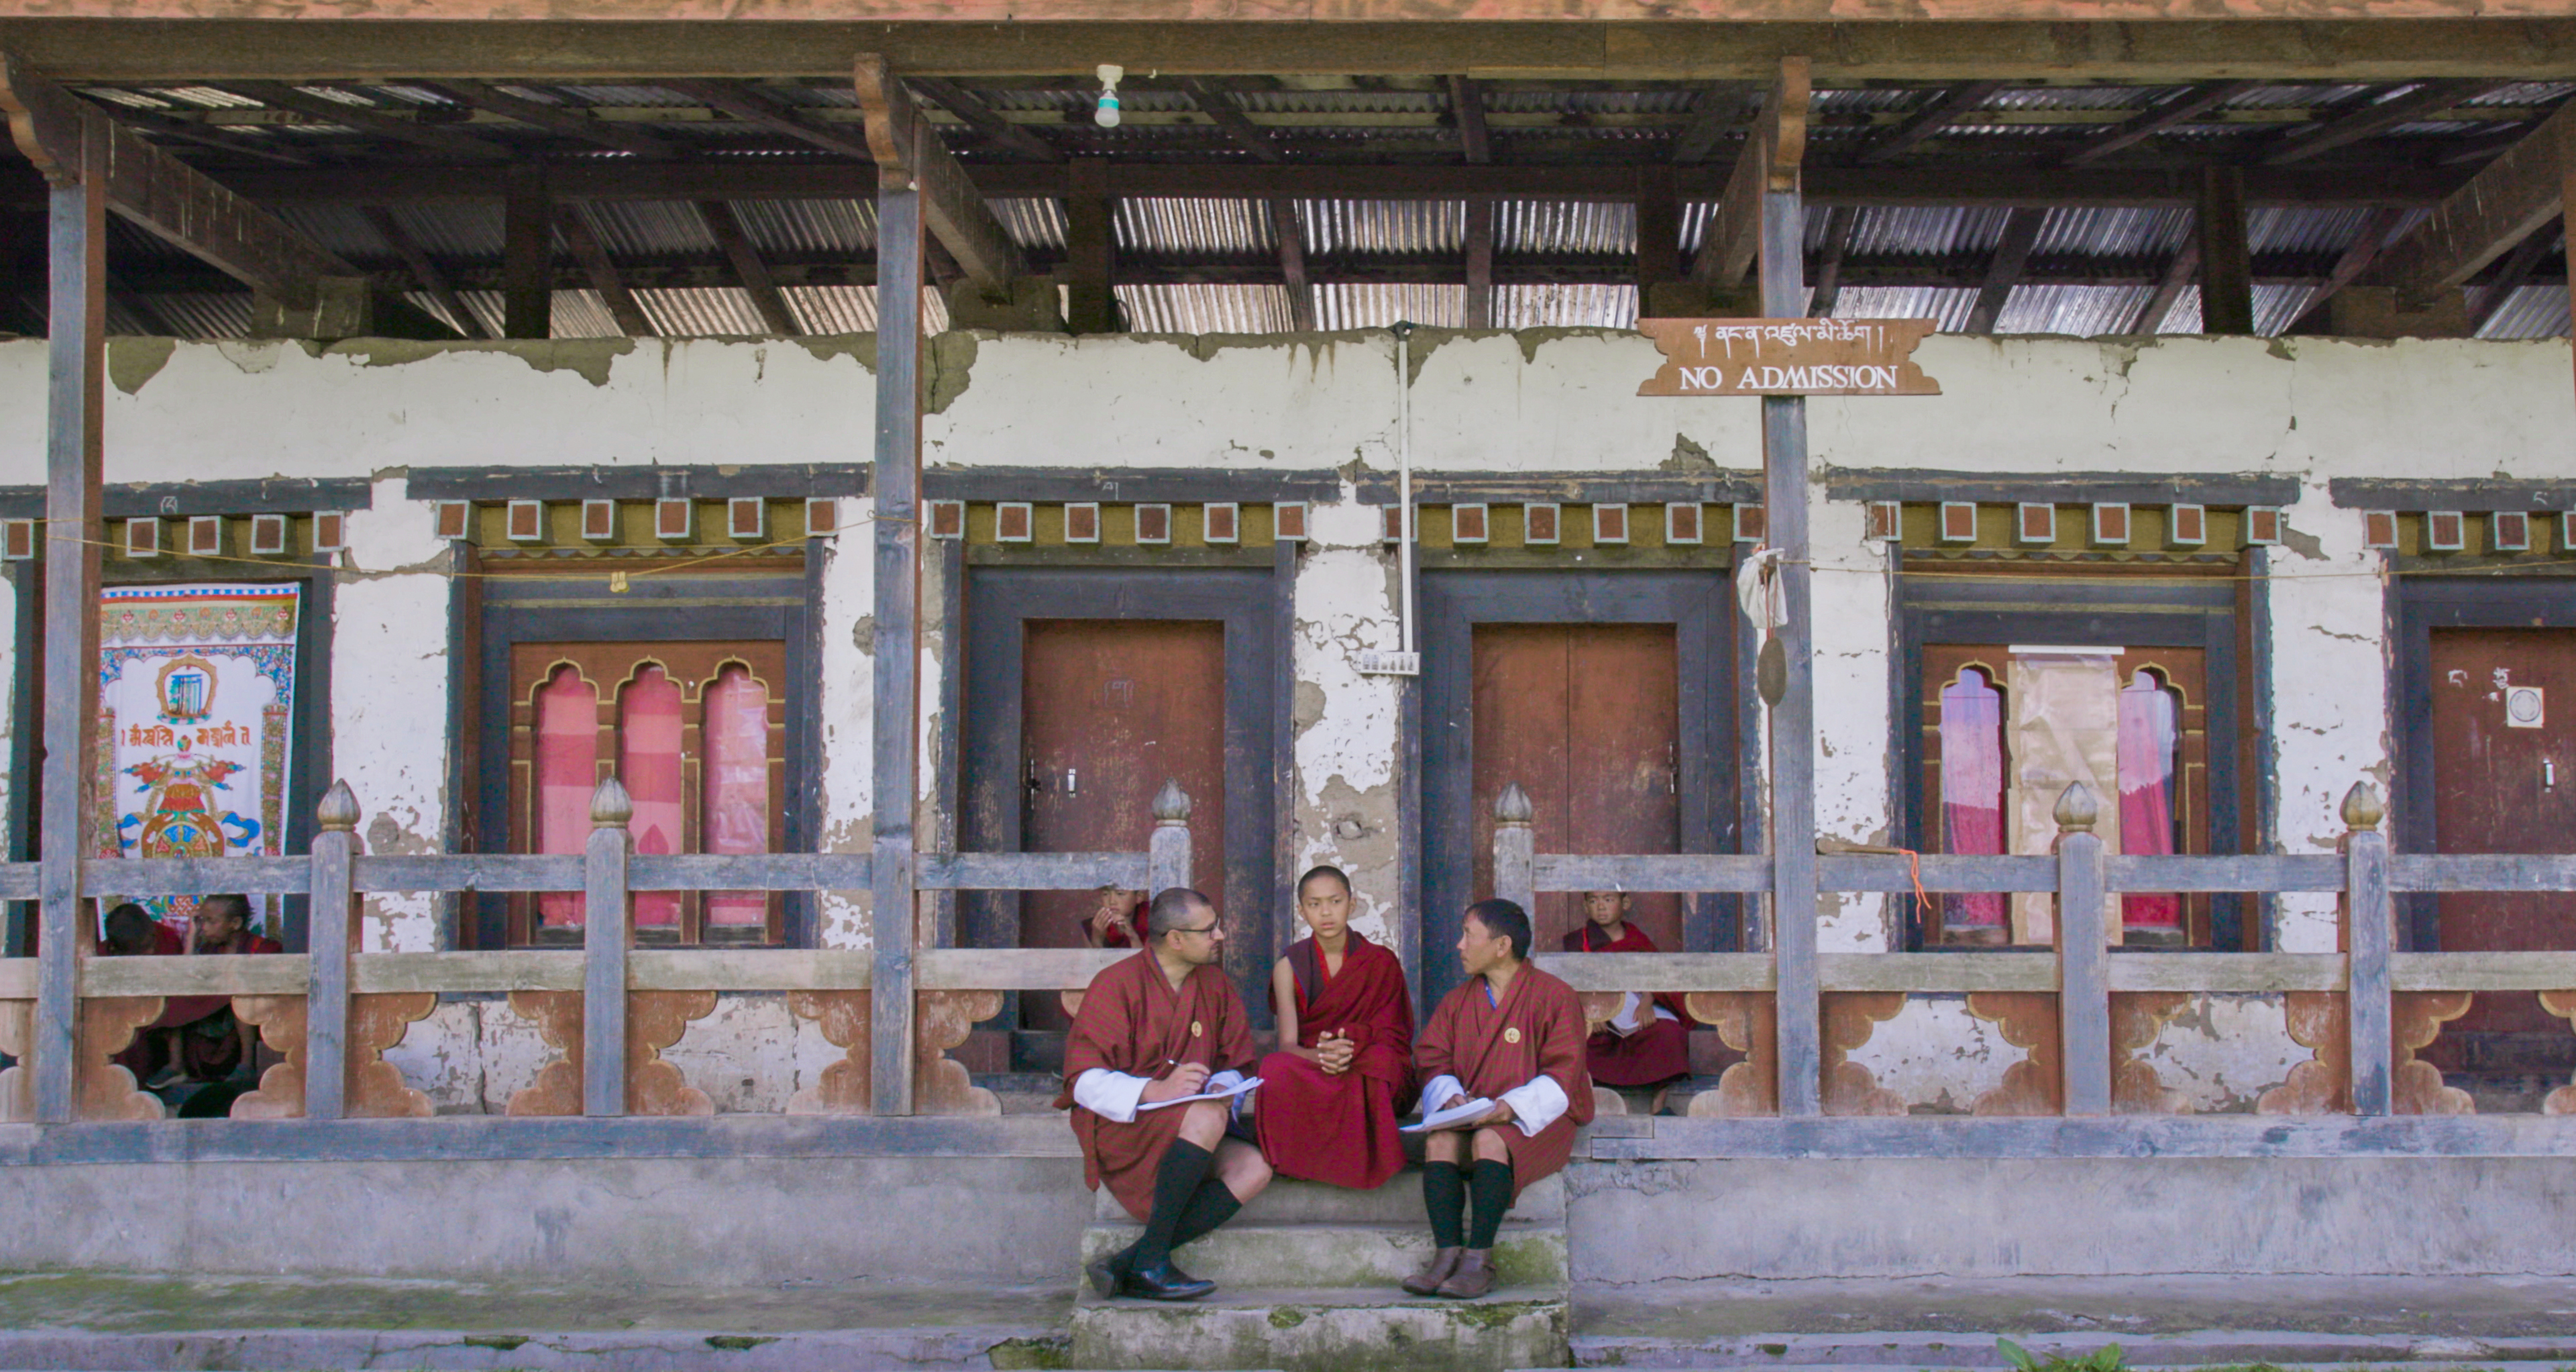 Still image from 'Agent of Happiness,' depicting three male figures seated on the steps of an ornate temple. All three are wearing robes in a deep maroon.